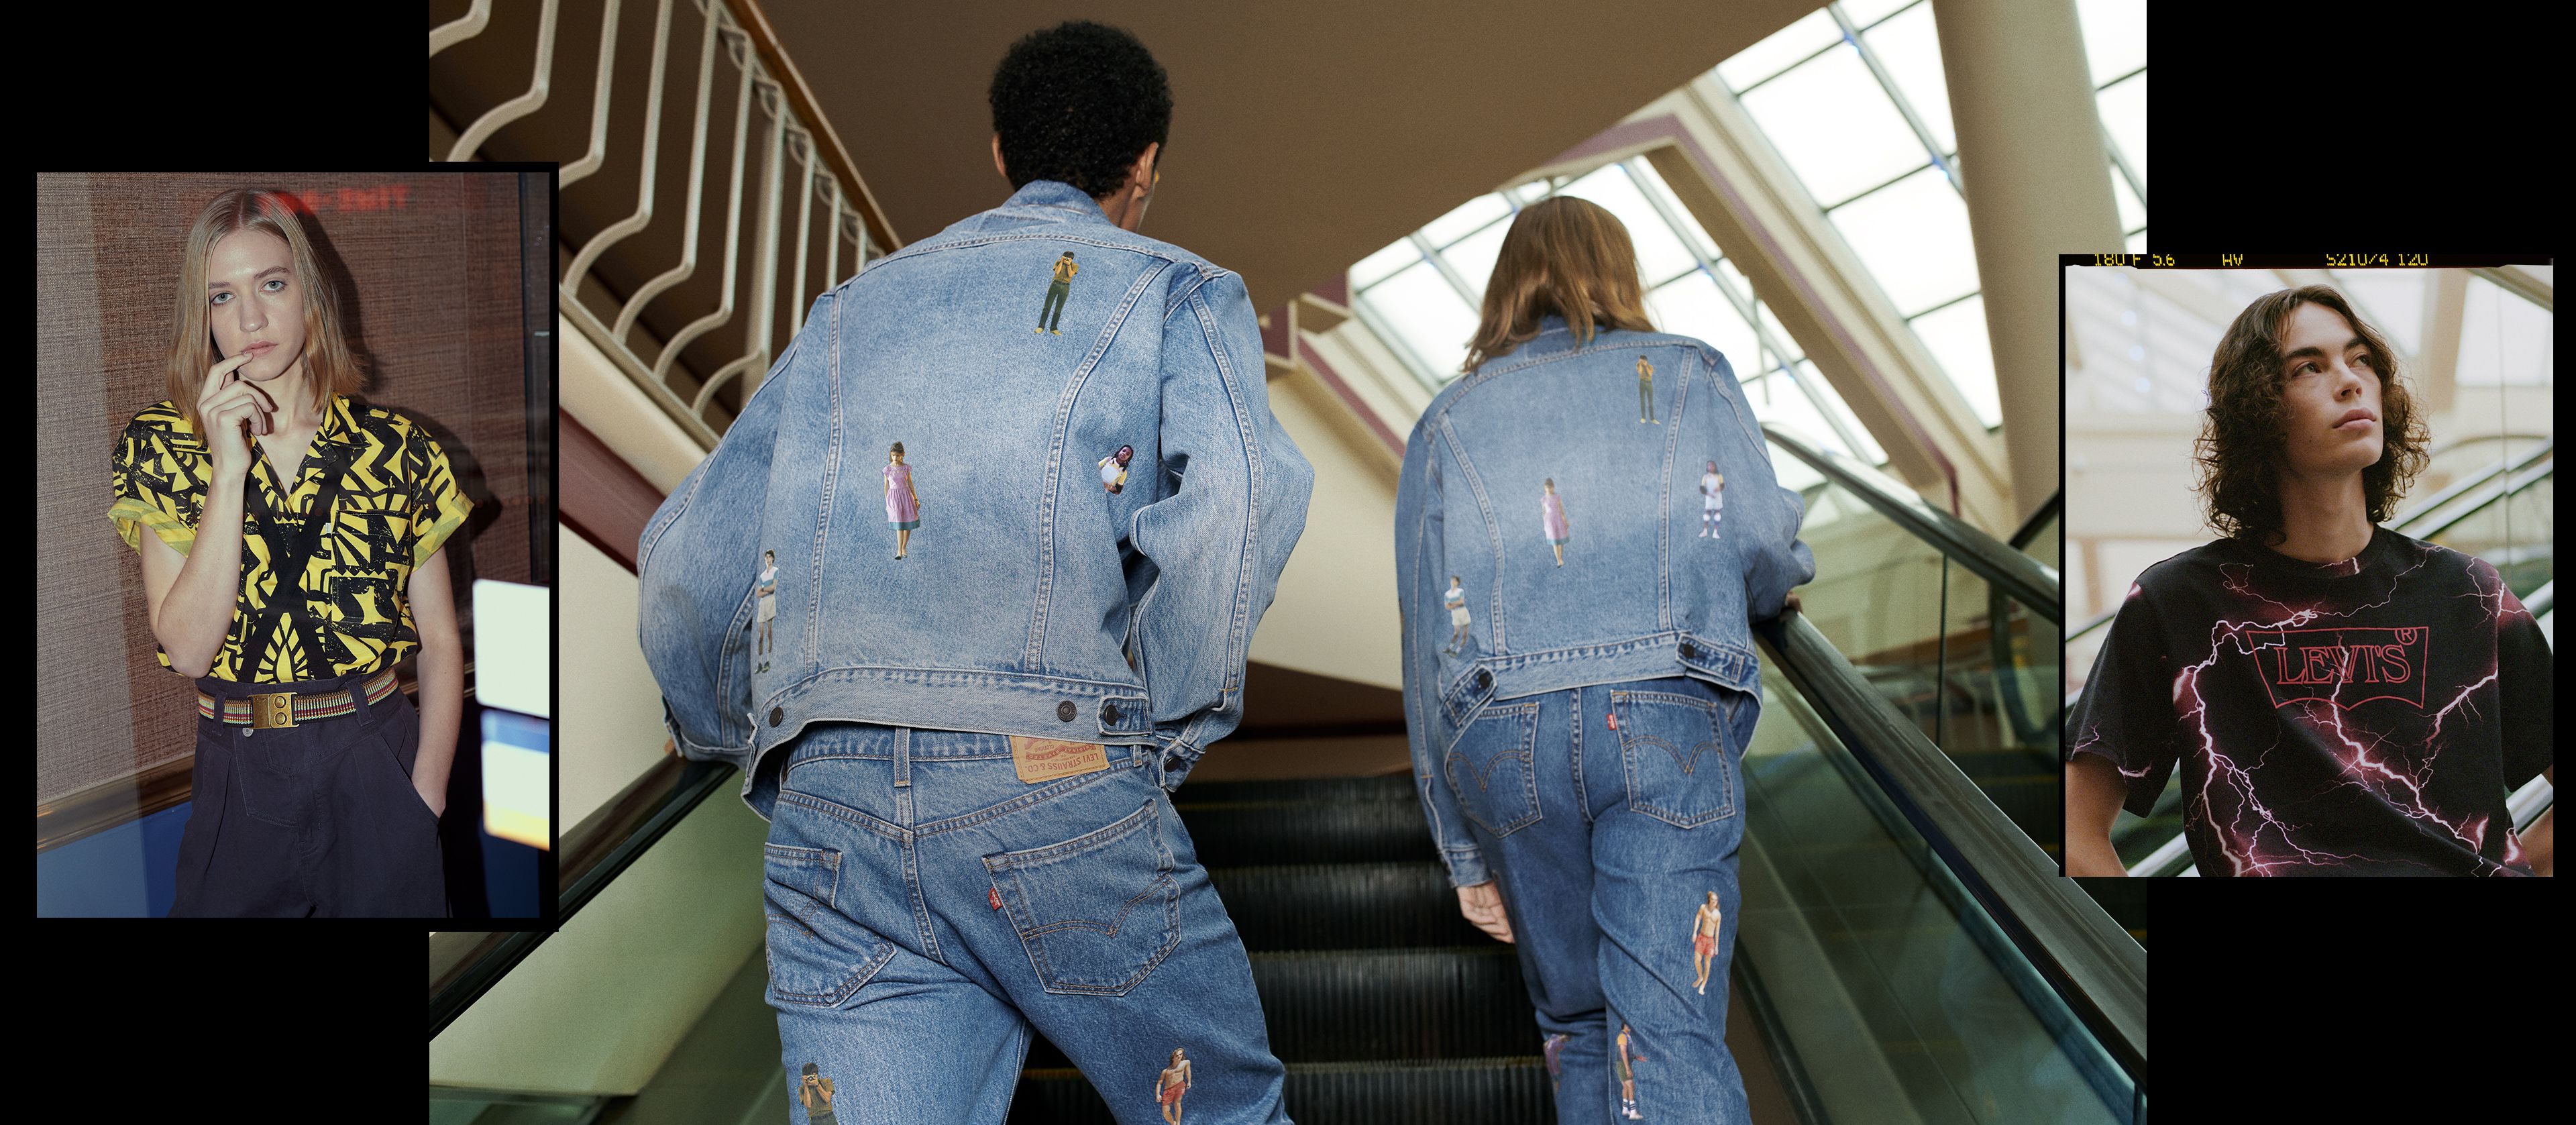 stranger things clothes levis